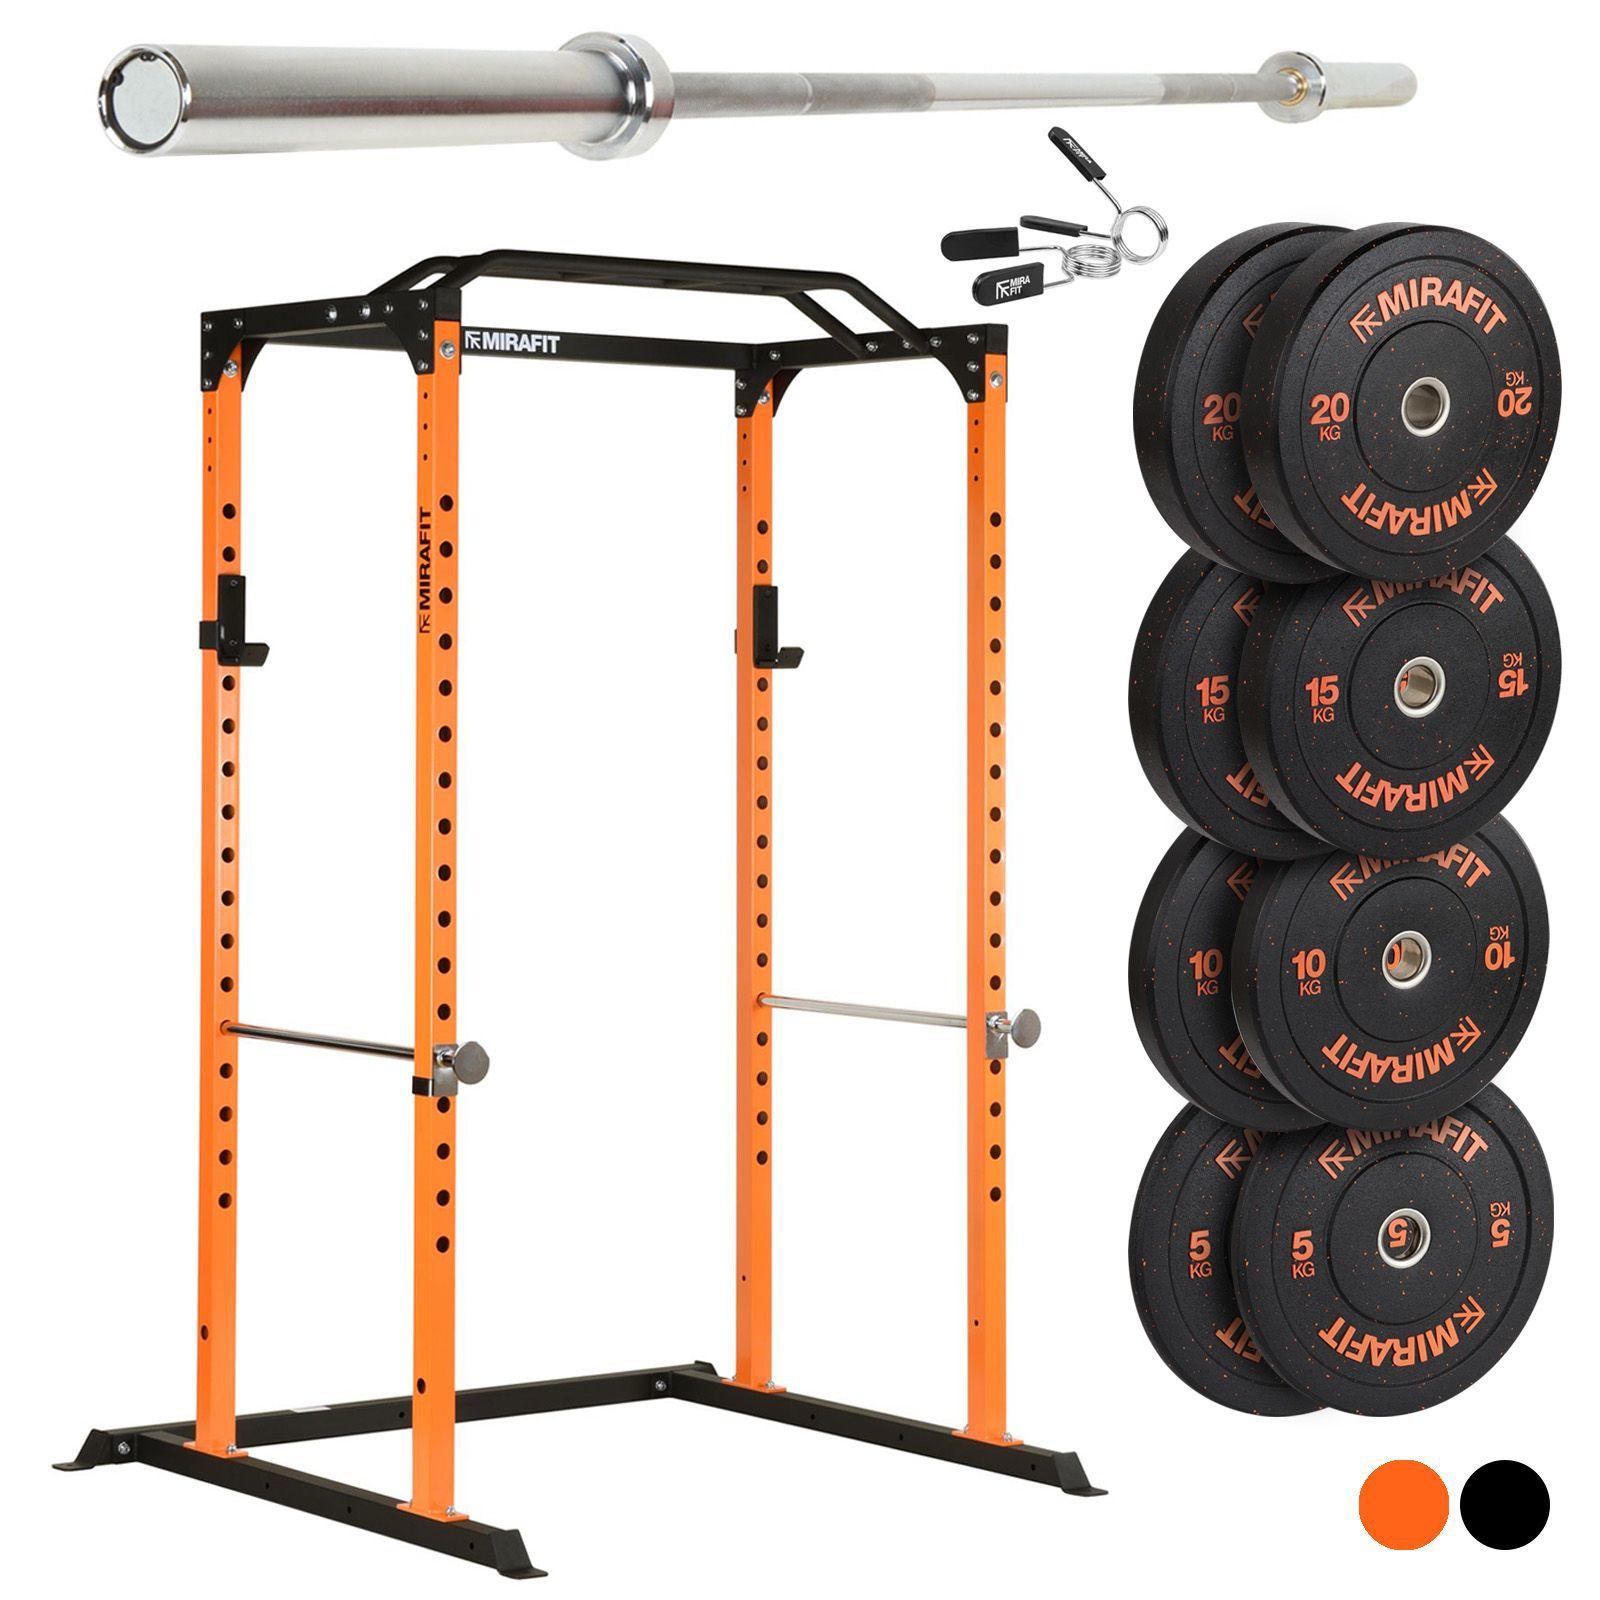 Fit Squat Rack and Bench Press for Home Fitness Equipment Ai CAR FUN Multi-Function Adjustable Squat Racks Standing 46-68 Inches Capacity Of550 Pounds Integrated Barbell Racks 